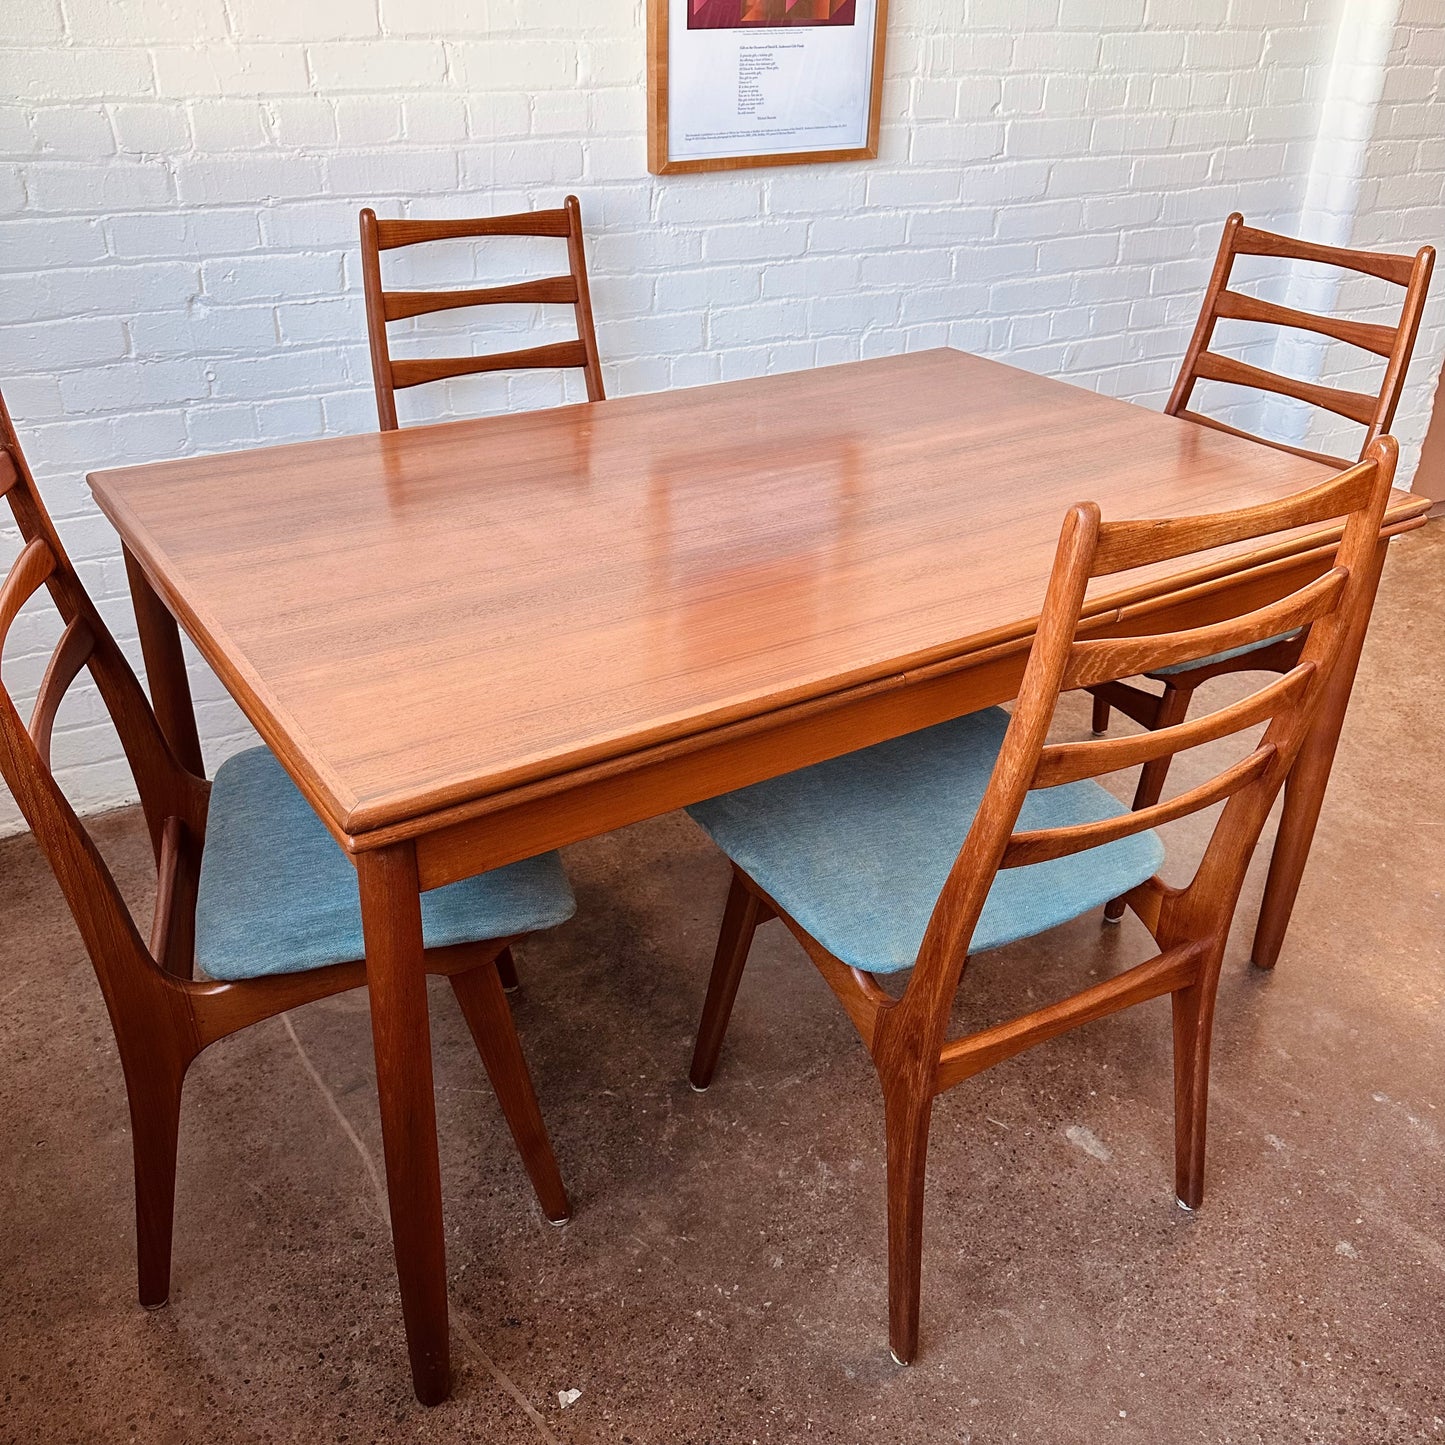 RESTORED DANISH TEAK DINING TABLE WITH DRAW LEAF